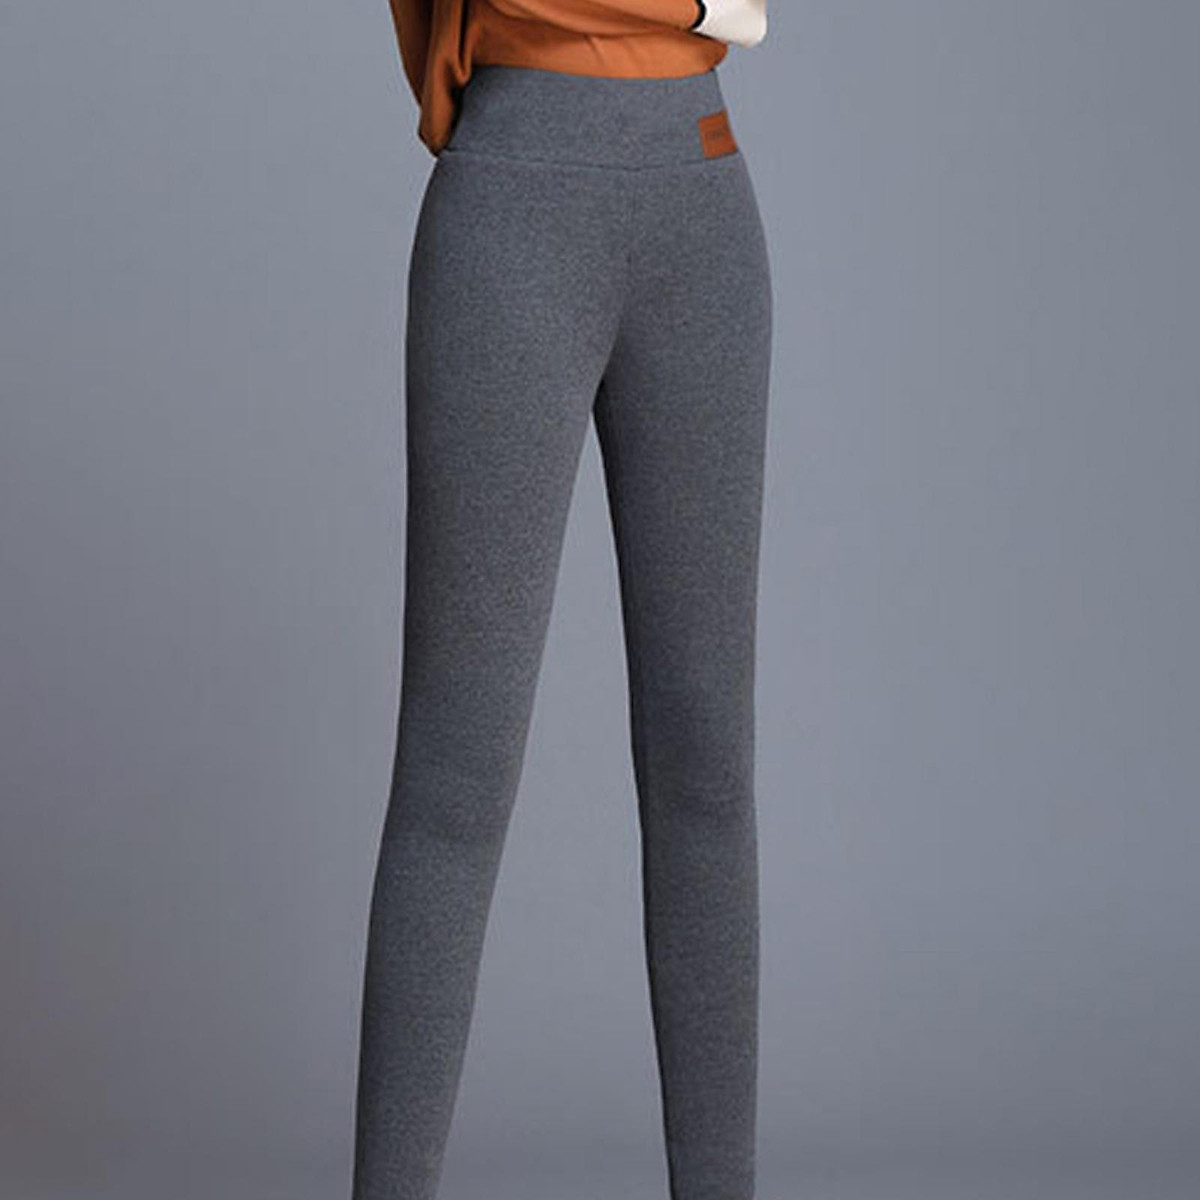 Clothing for cold weather Thermal Pants